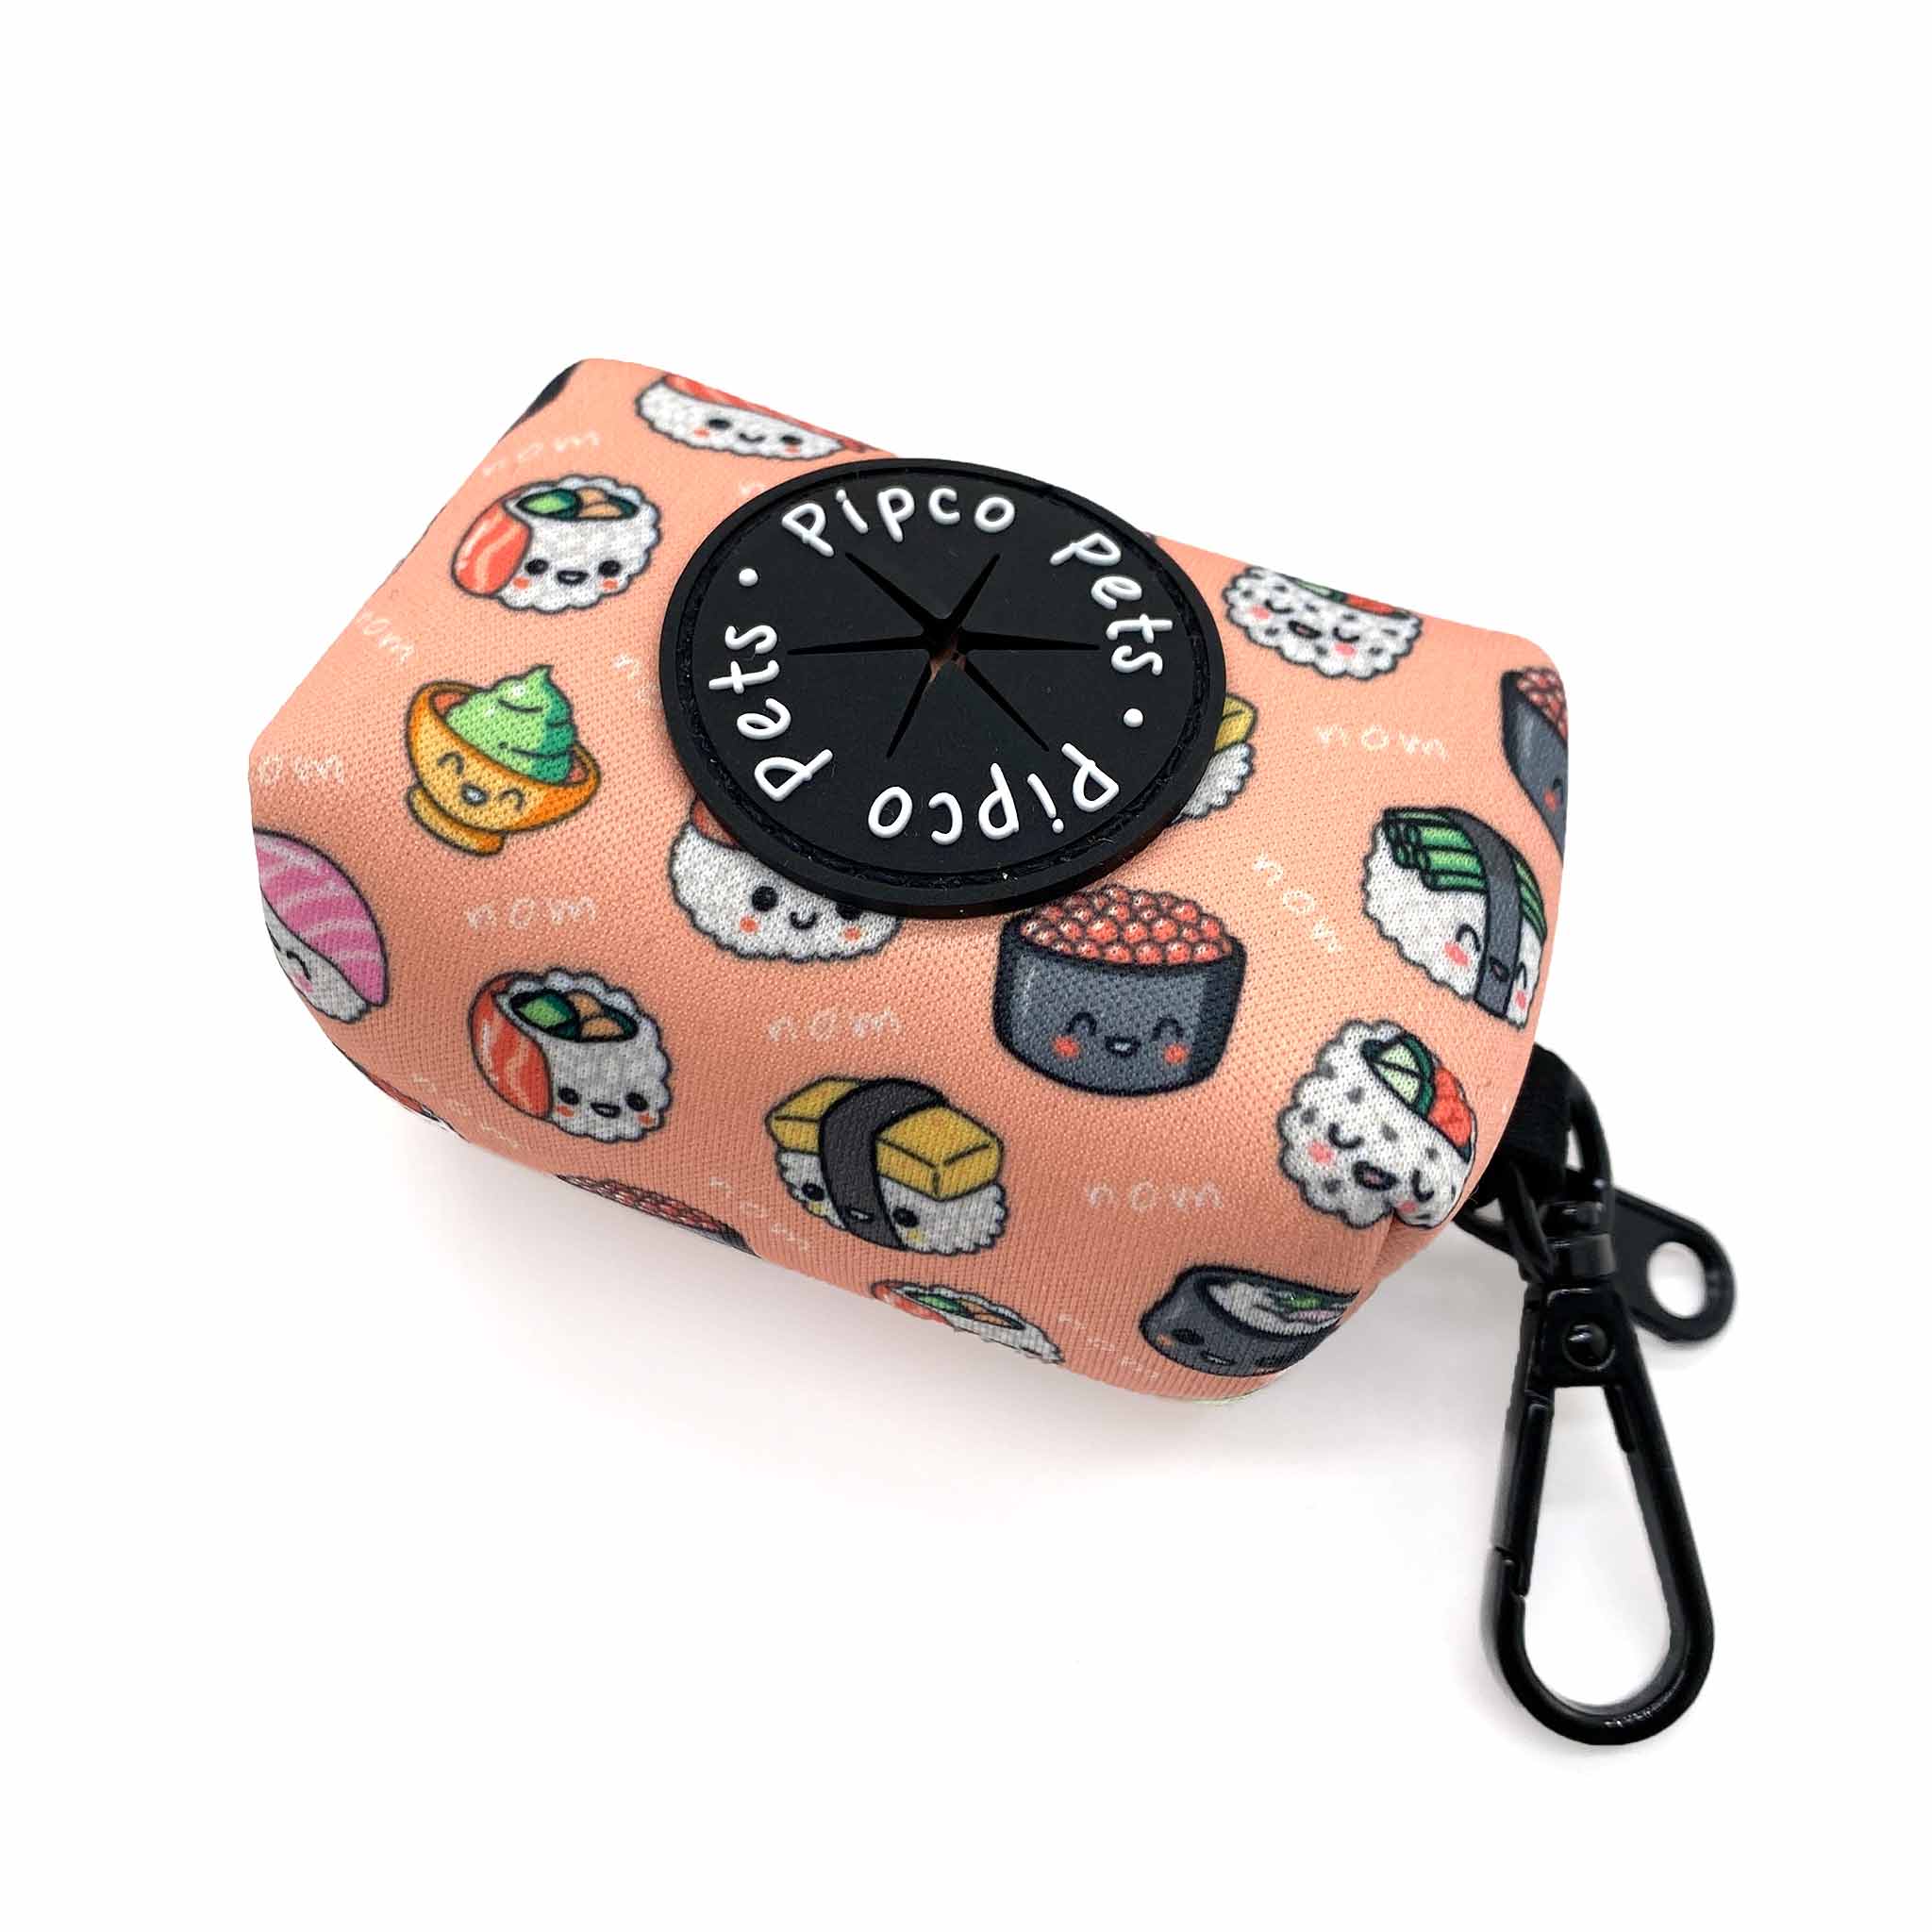 Pipco Pets dog poo bag dispenser with Sushi Train print pattern in pink 